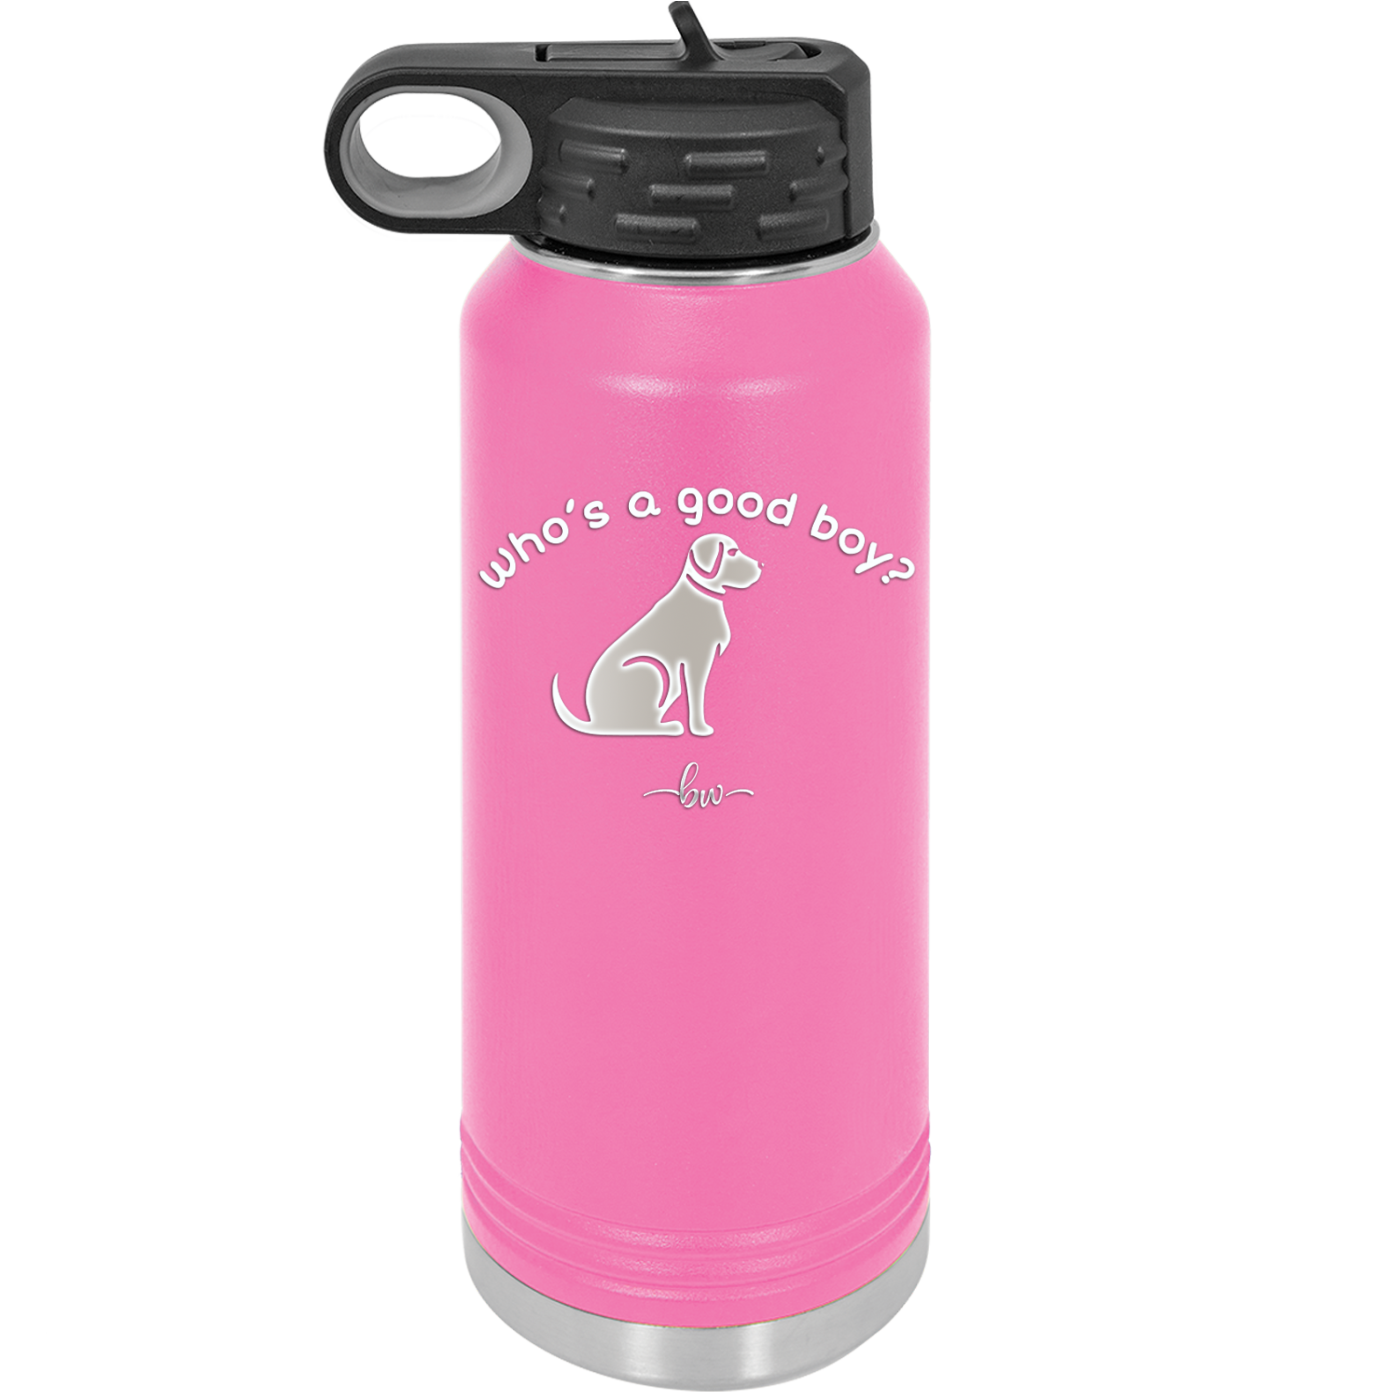 Who's a Good Boy - Laser Engraved Stainless Steel Drinkware - 1026 -